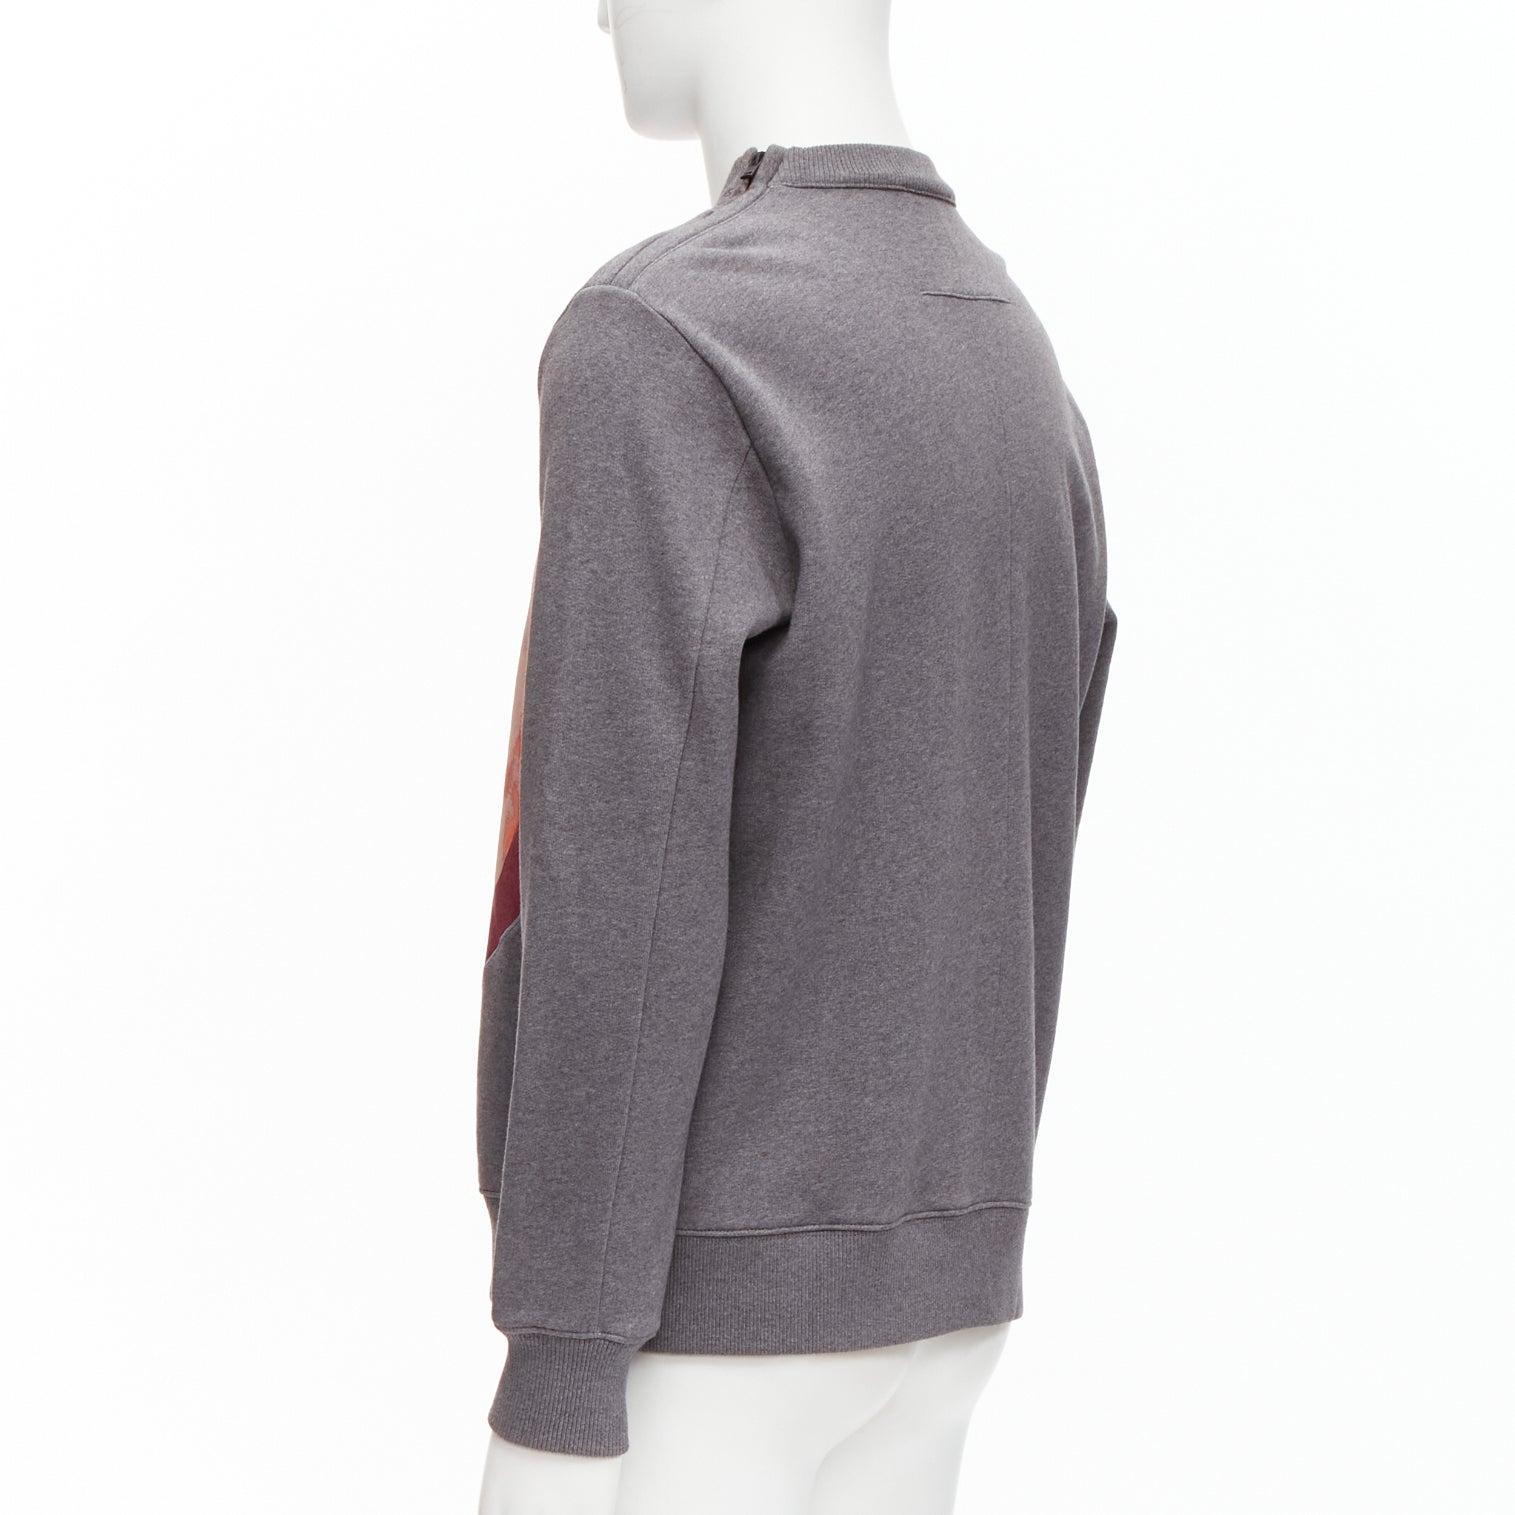 GIVENCHY Riccardo Tisci Madonna pink patch print grey zip shoulder sweater XS For Sale 1